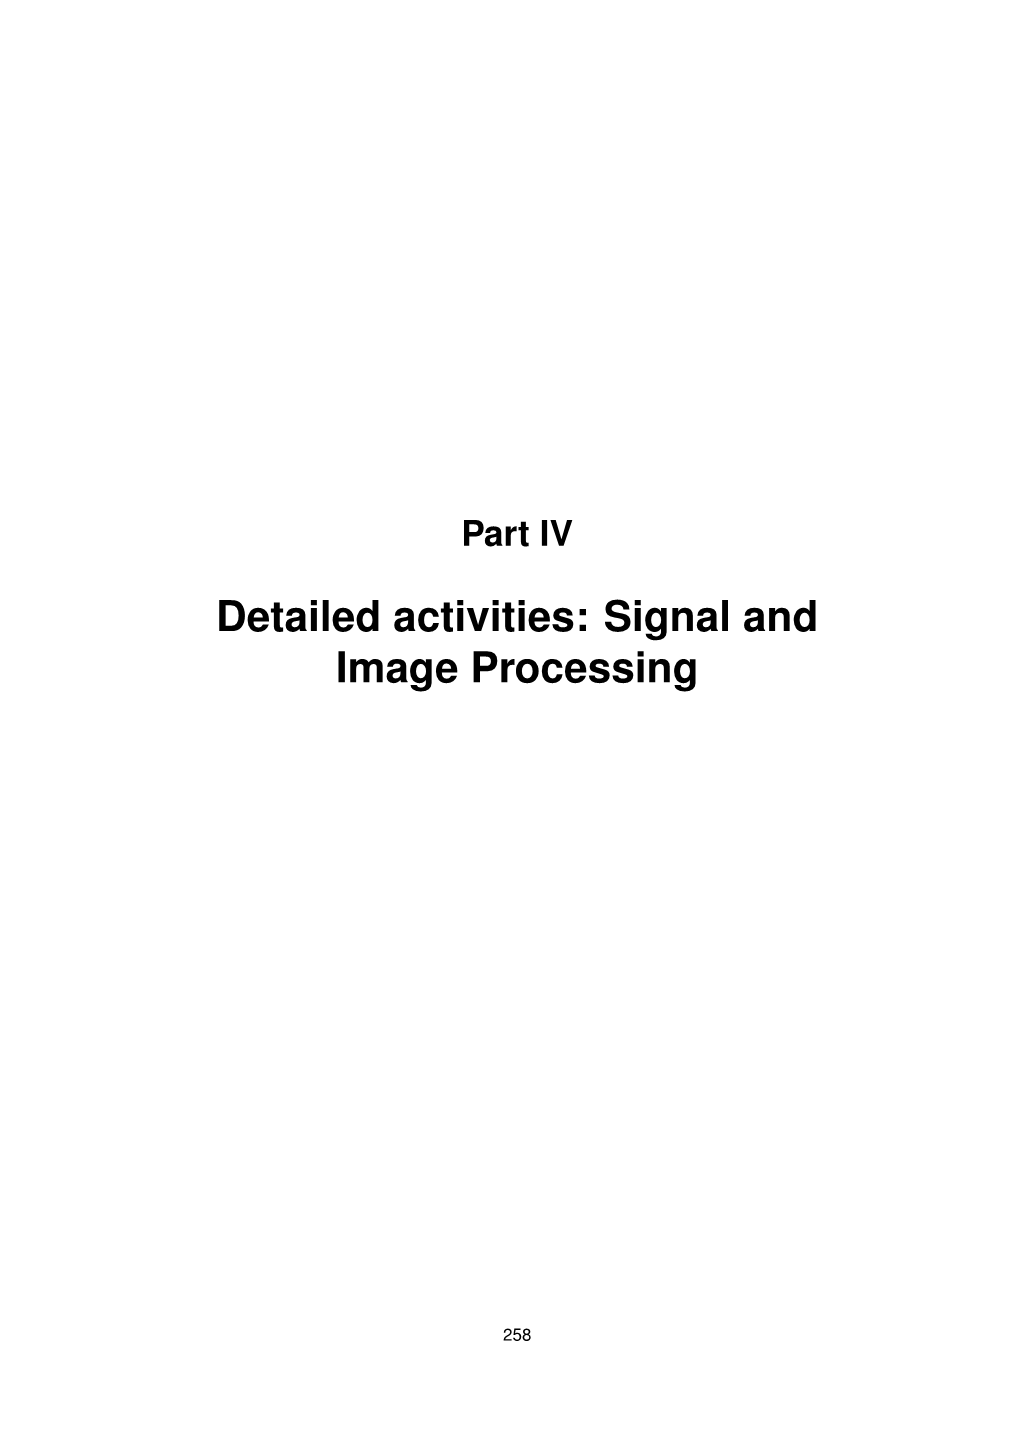 Detailed Activities: Signal and Image Processing